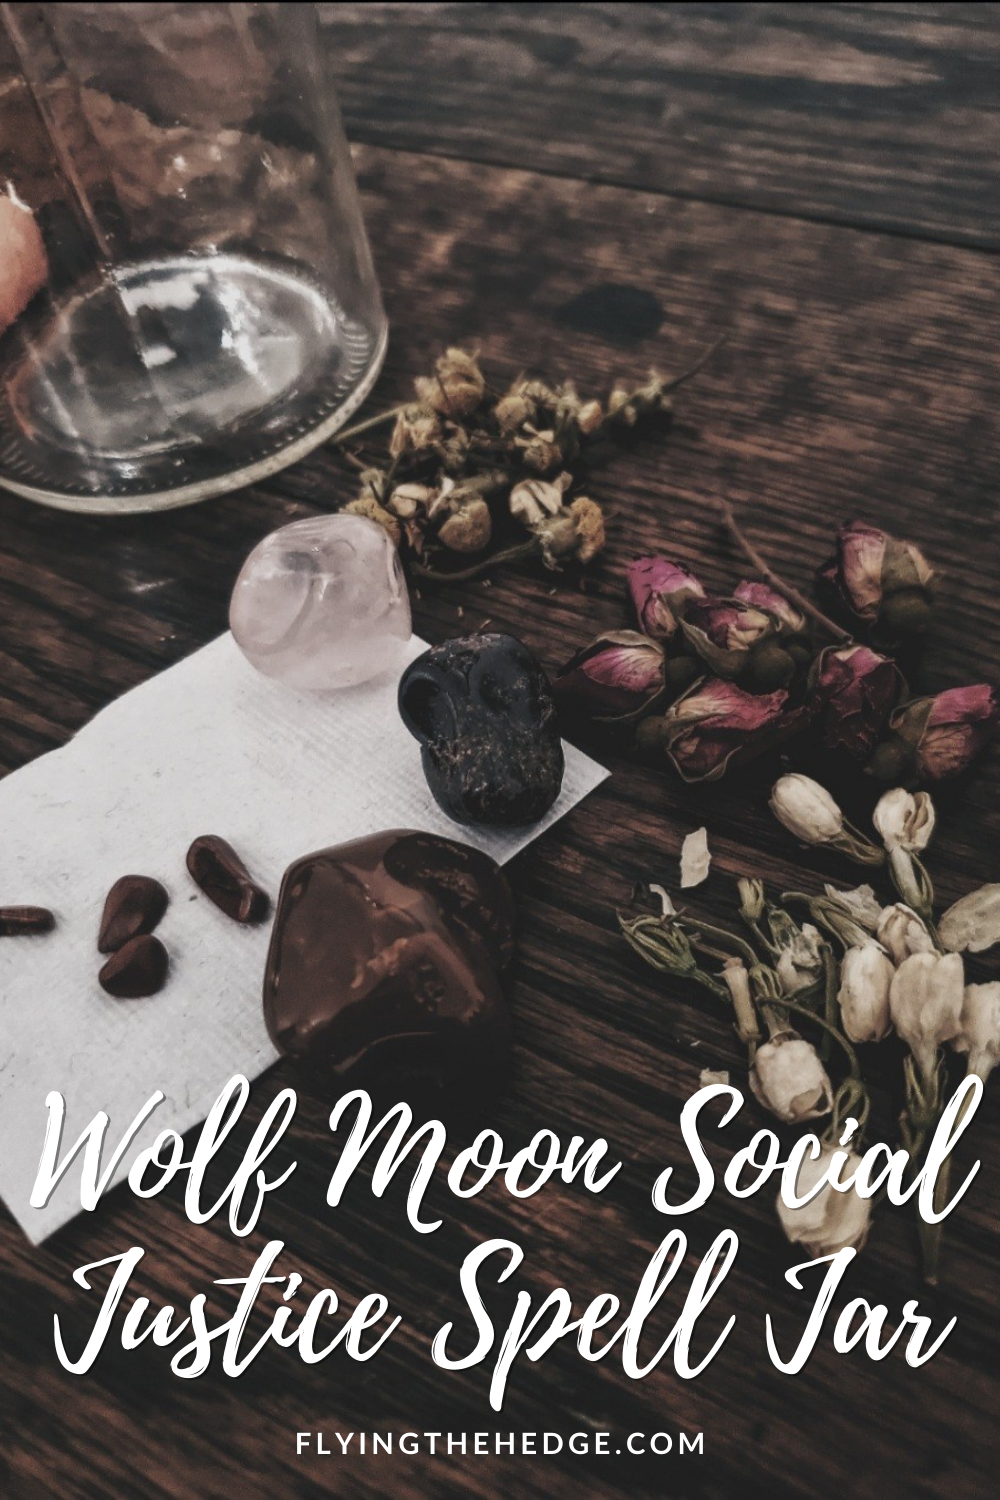 spell jar, full moon, social justice, wolf moon, spell, ritual, witchcraft, hedgecraft, hedgewitch, hedge witch, traditional witchcraft, witchcraft, occult, pagan, neopagan, wicca, wiccan, cunningfolk,